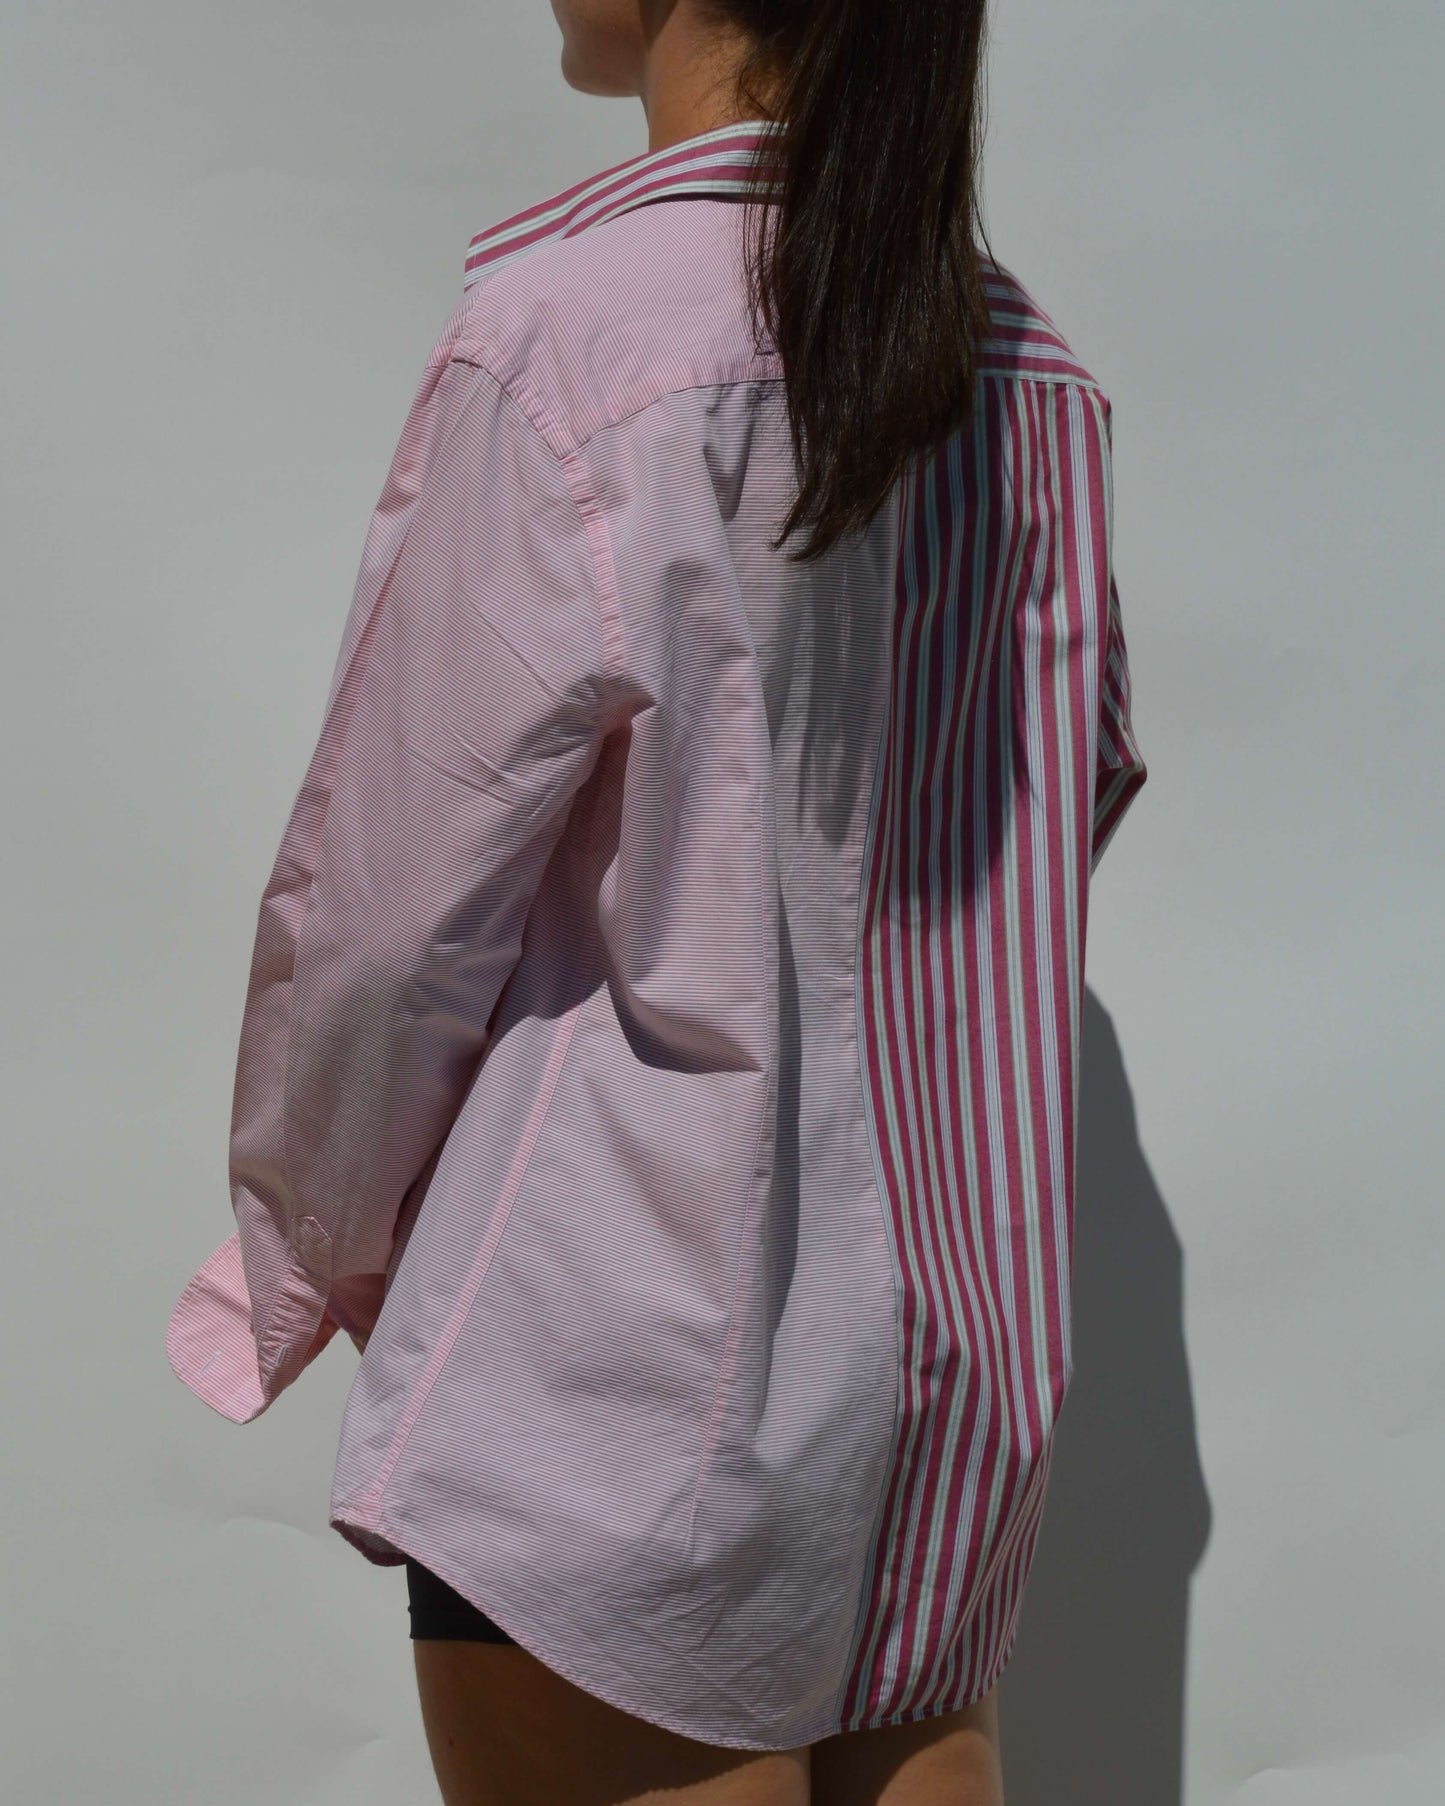 DUO Shirt - Pink Perfection (S/L)